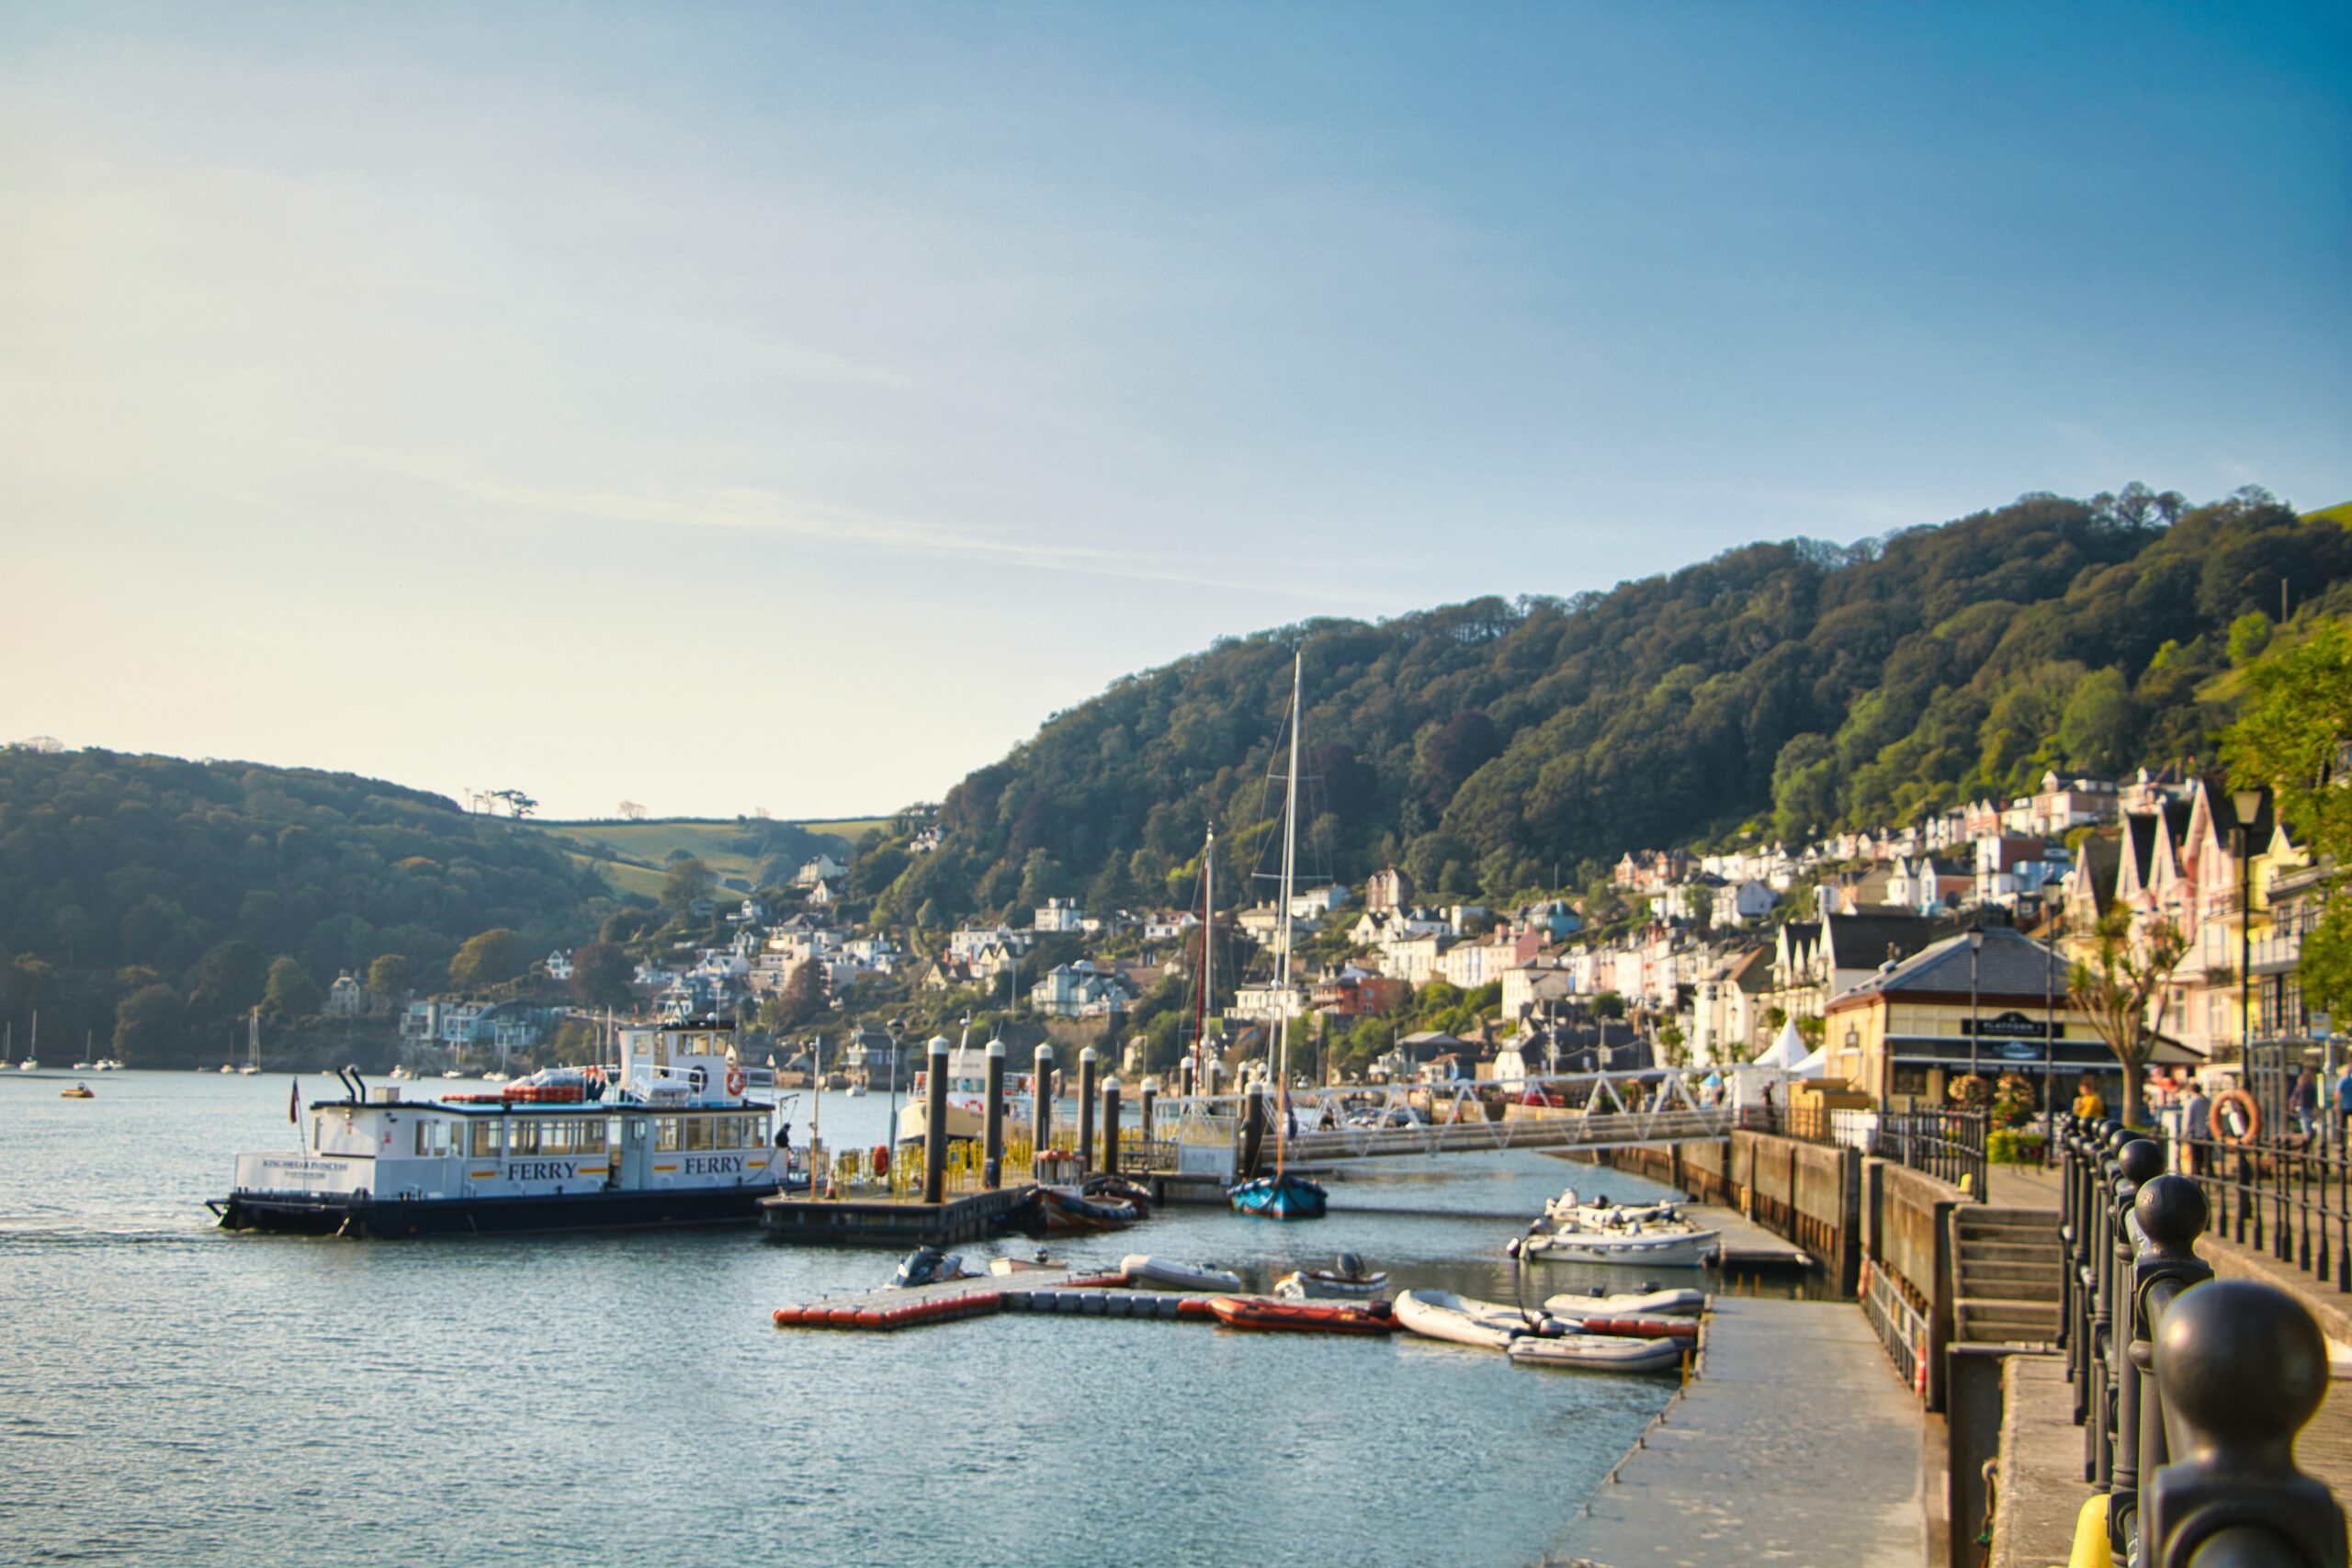 The marina in Dartmouth on a bright sunny evening. Boats docked and the water is still with buildings in the far background.